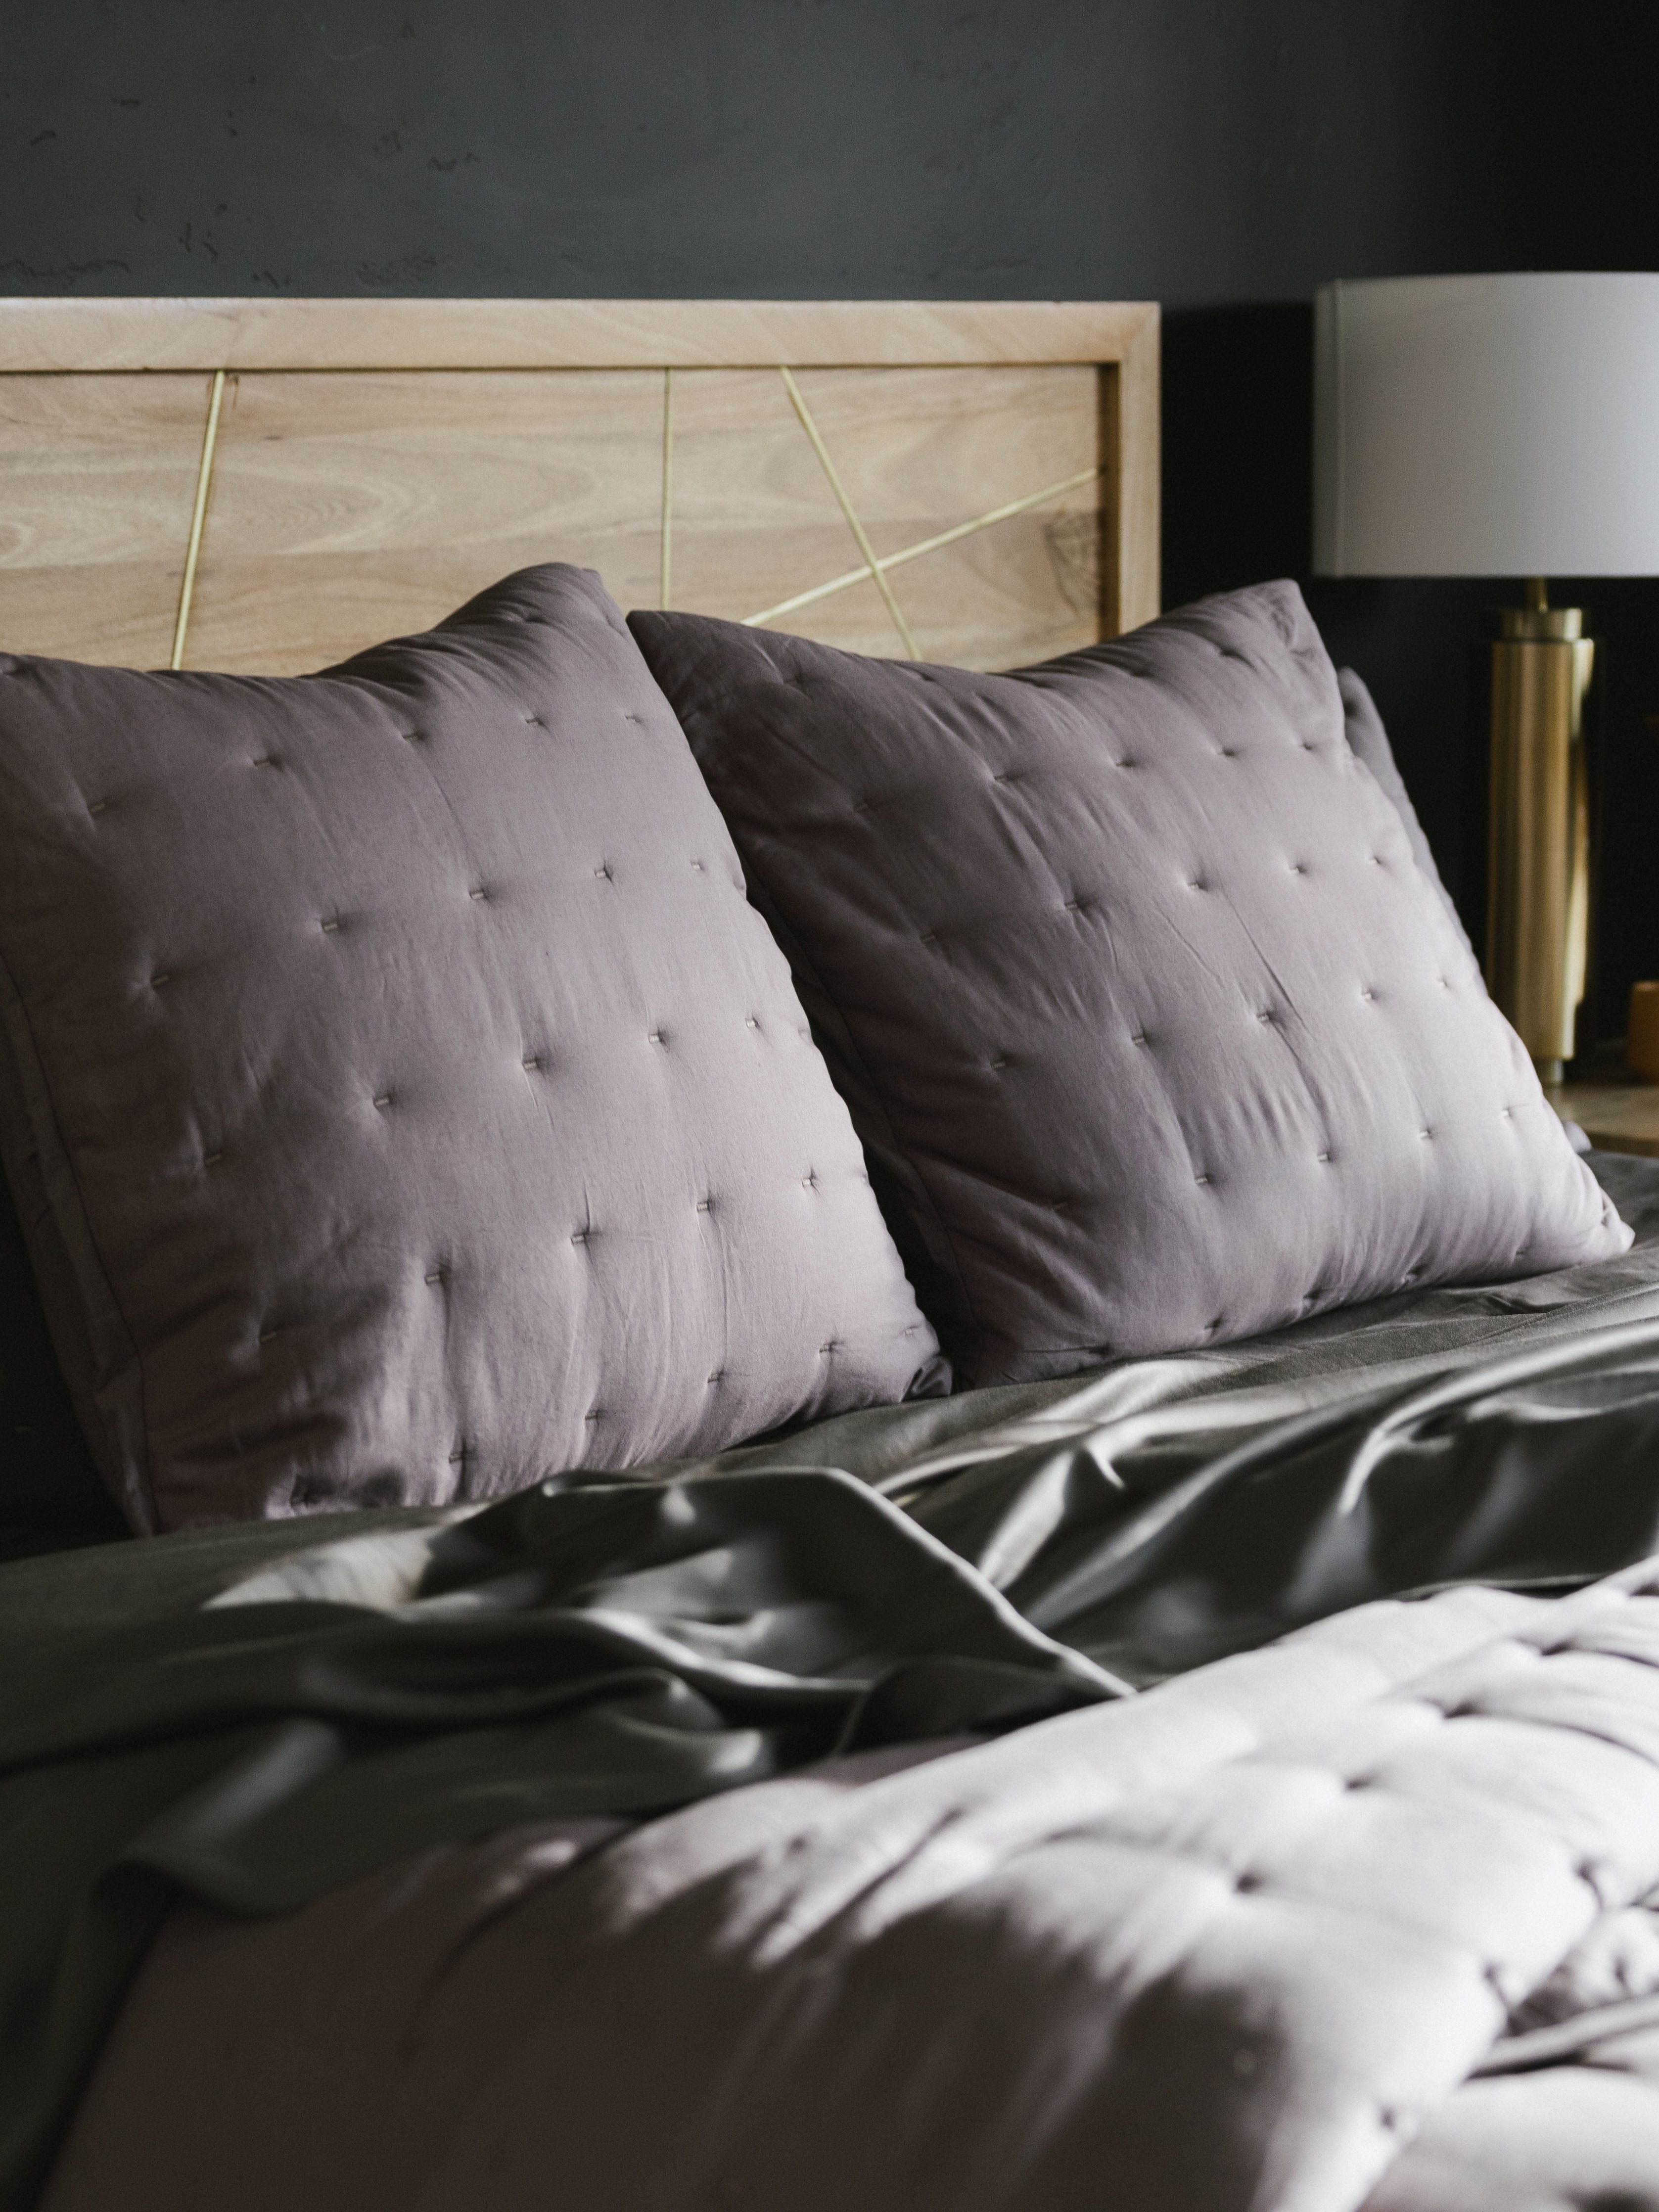 A cozy bed with Cozy Earth's Premium Down Alternative Insert covered in dark gray bedding and adorned with two large, tufted gray pillows rests against a light wood headboard. On the right side, a modern bedside lamp with a gold base adds elegance to the scene. The room's dark wall background creates a striking contrast with the light-colored headboard and pillows.